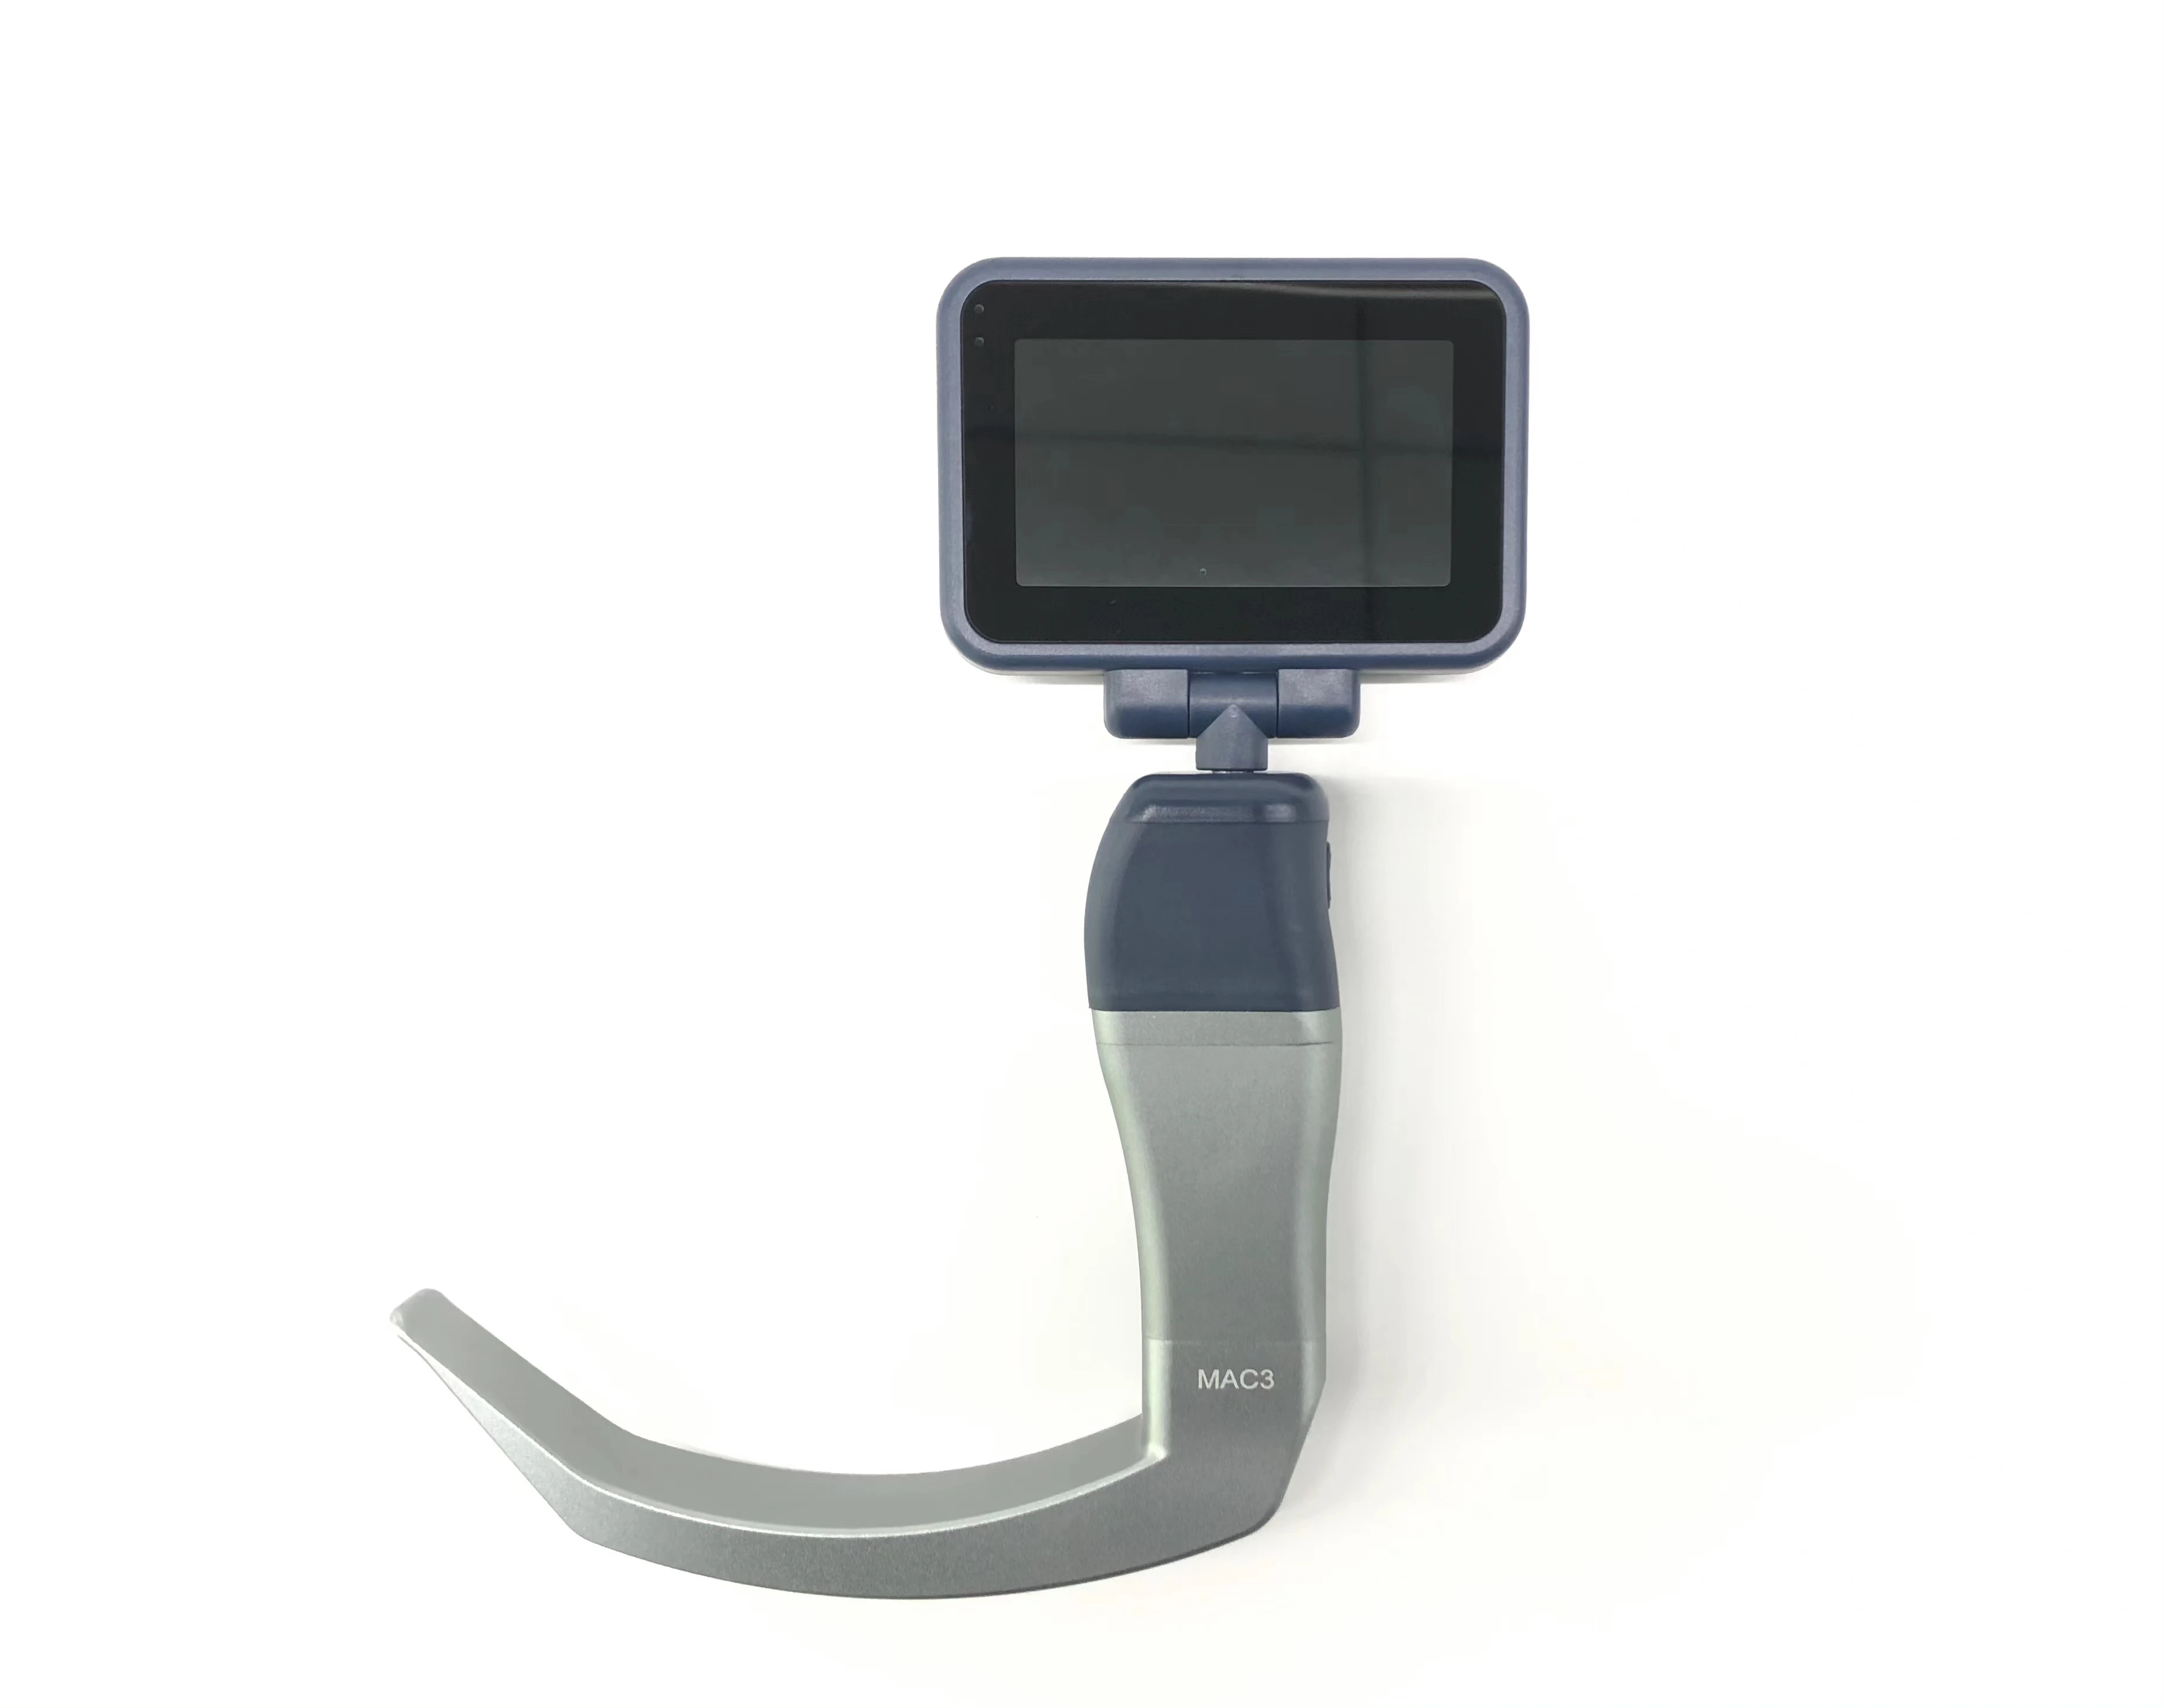 

YD-31D Anesthesia Reusable Video Laryngoscope with Reusable Blade for Airway Intubation